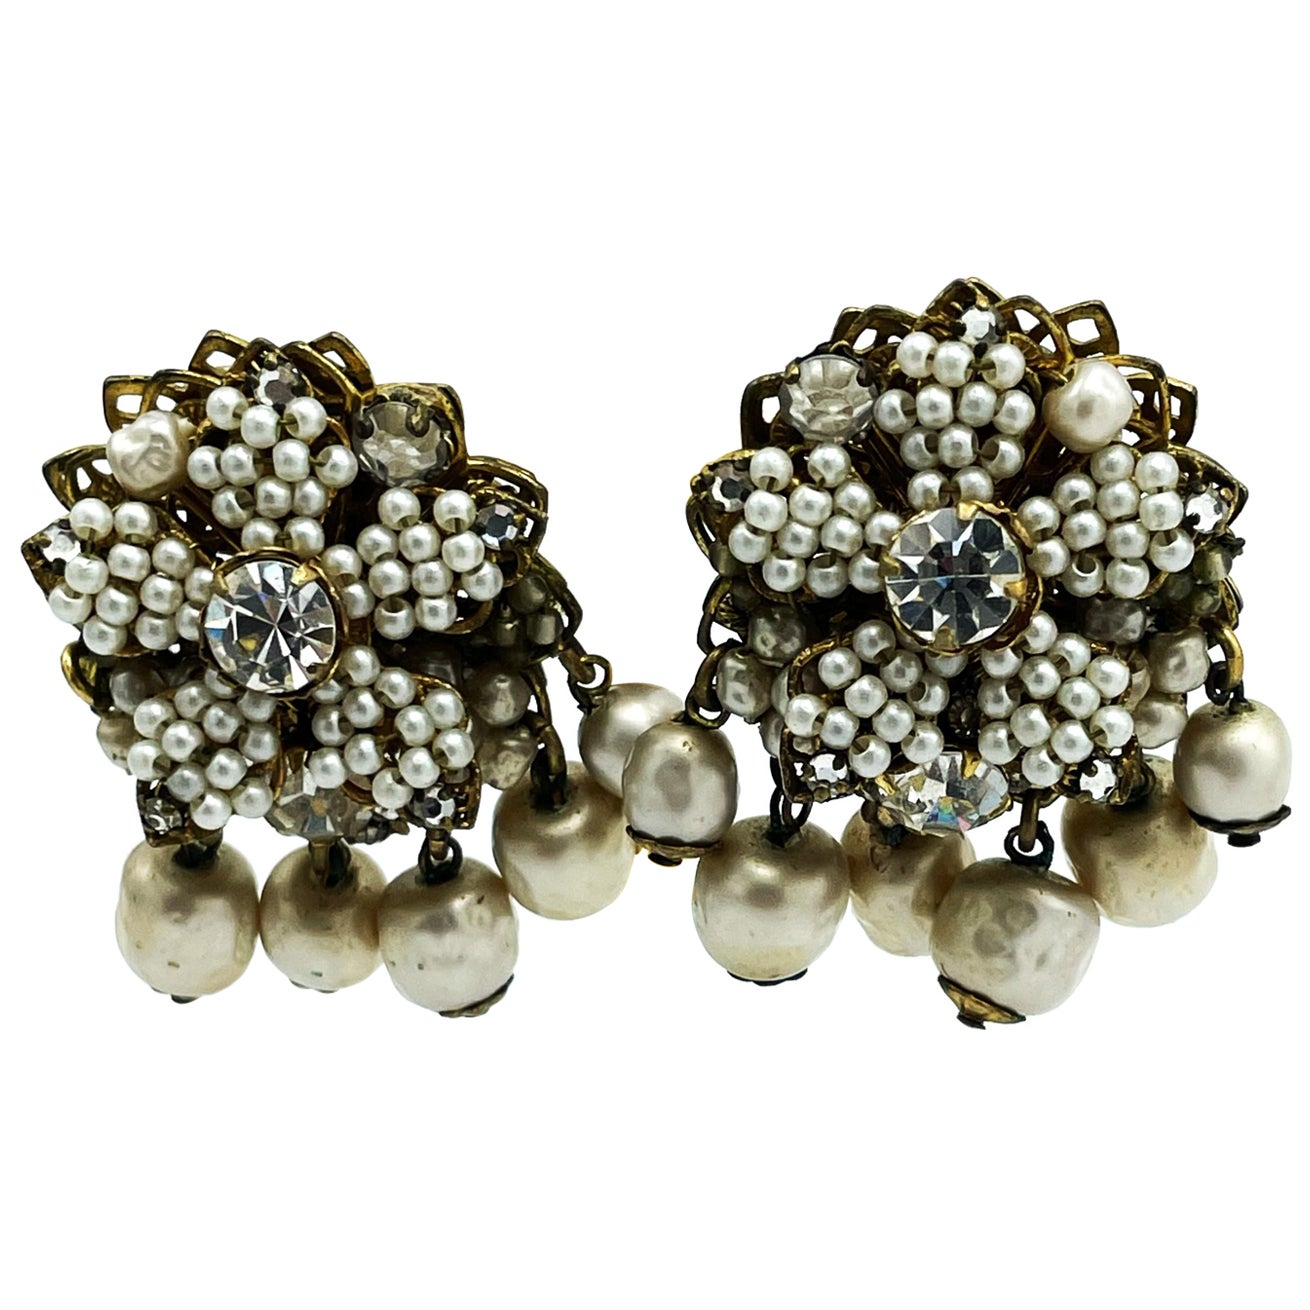 
Vintage ear clips from DEMARIO NY from the 1950s.
A round shape with a 5-petaled flower, these are set with tiny hand-crafted pearls. Larger rhinestone in the middle and at the tips of the petals. There are 6 movable beads hanging at the bottom.
A